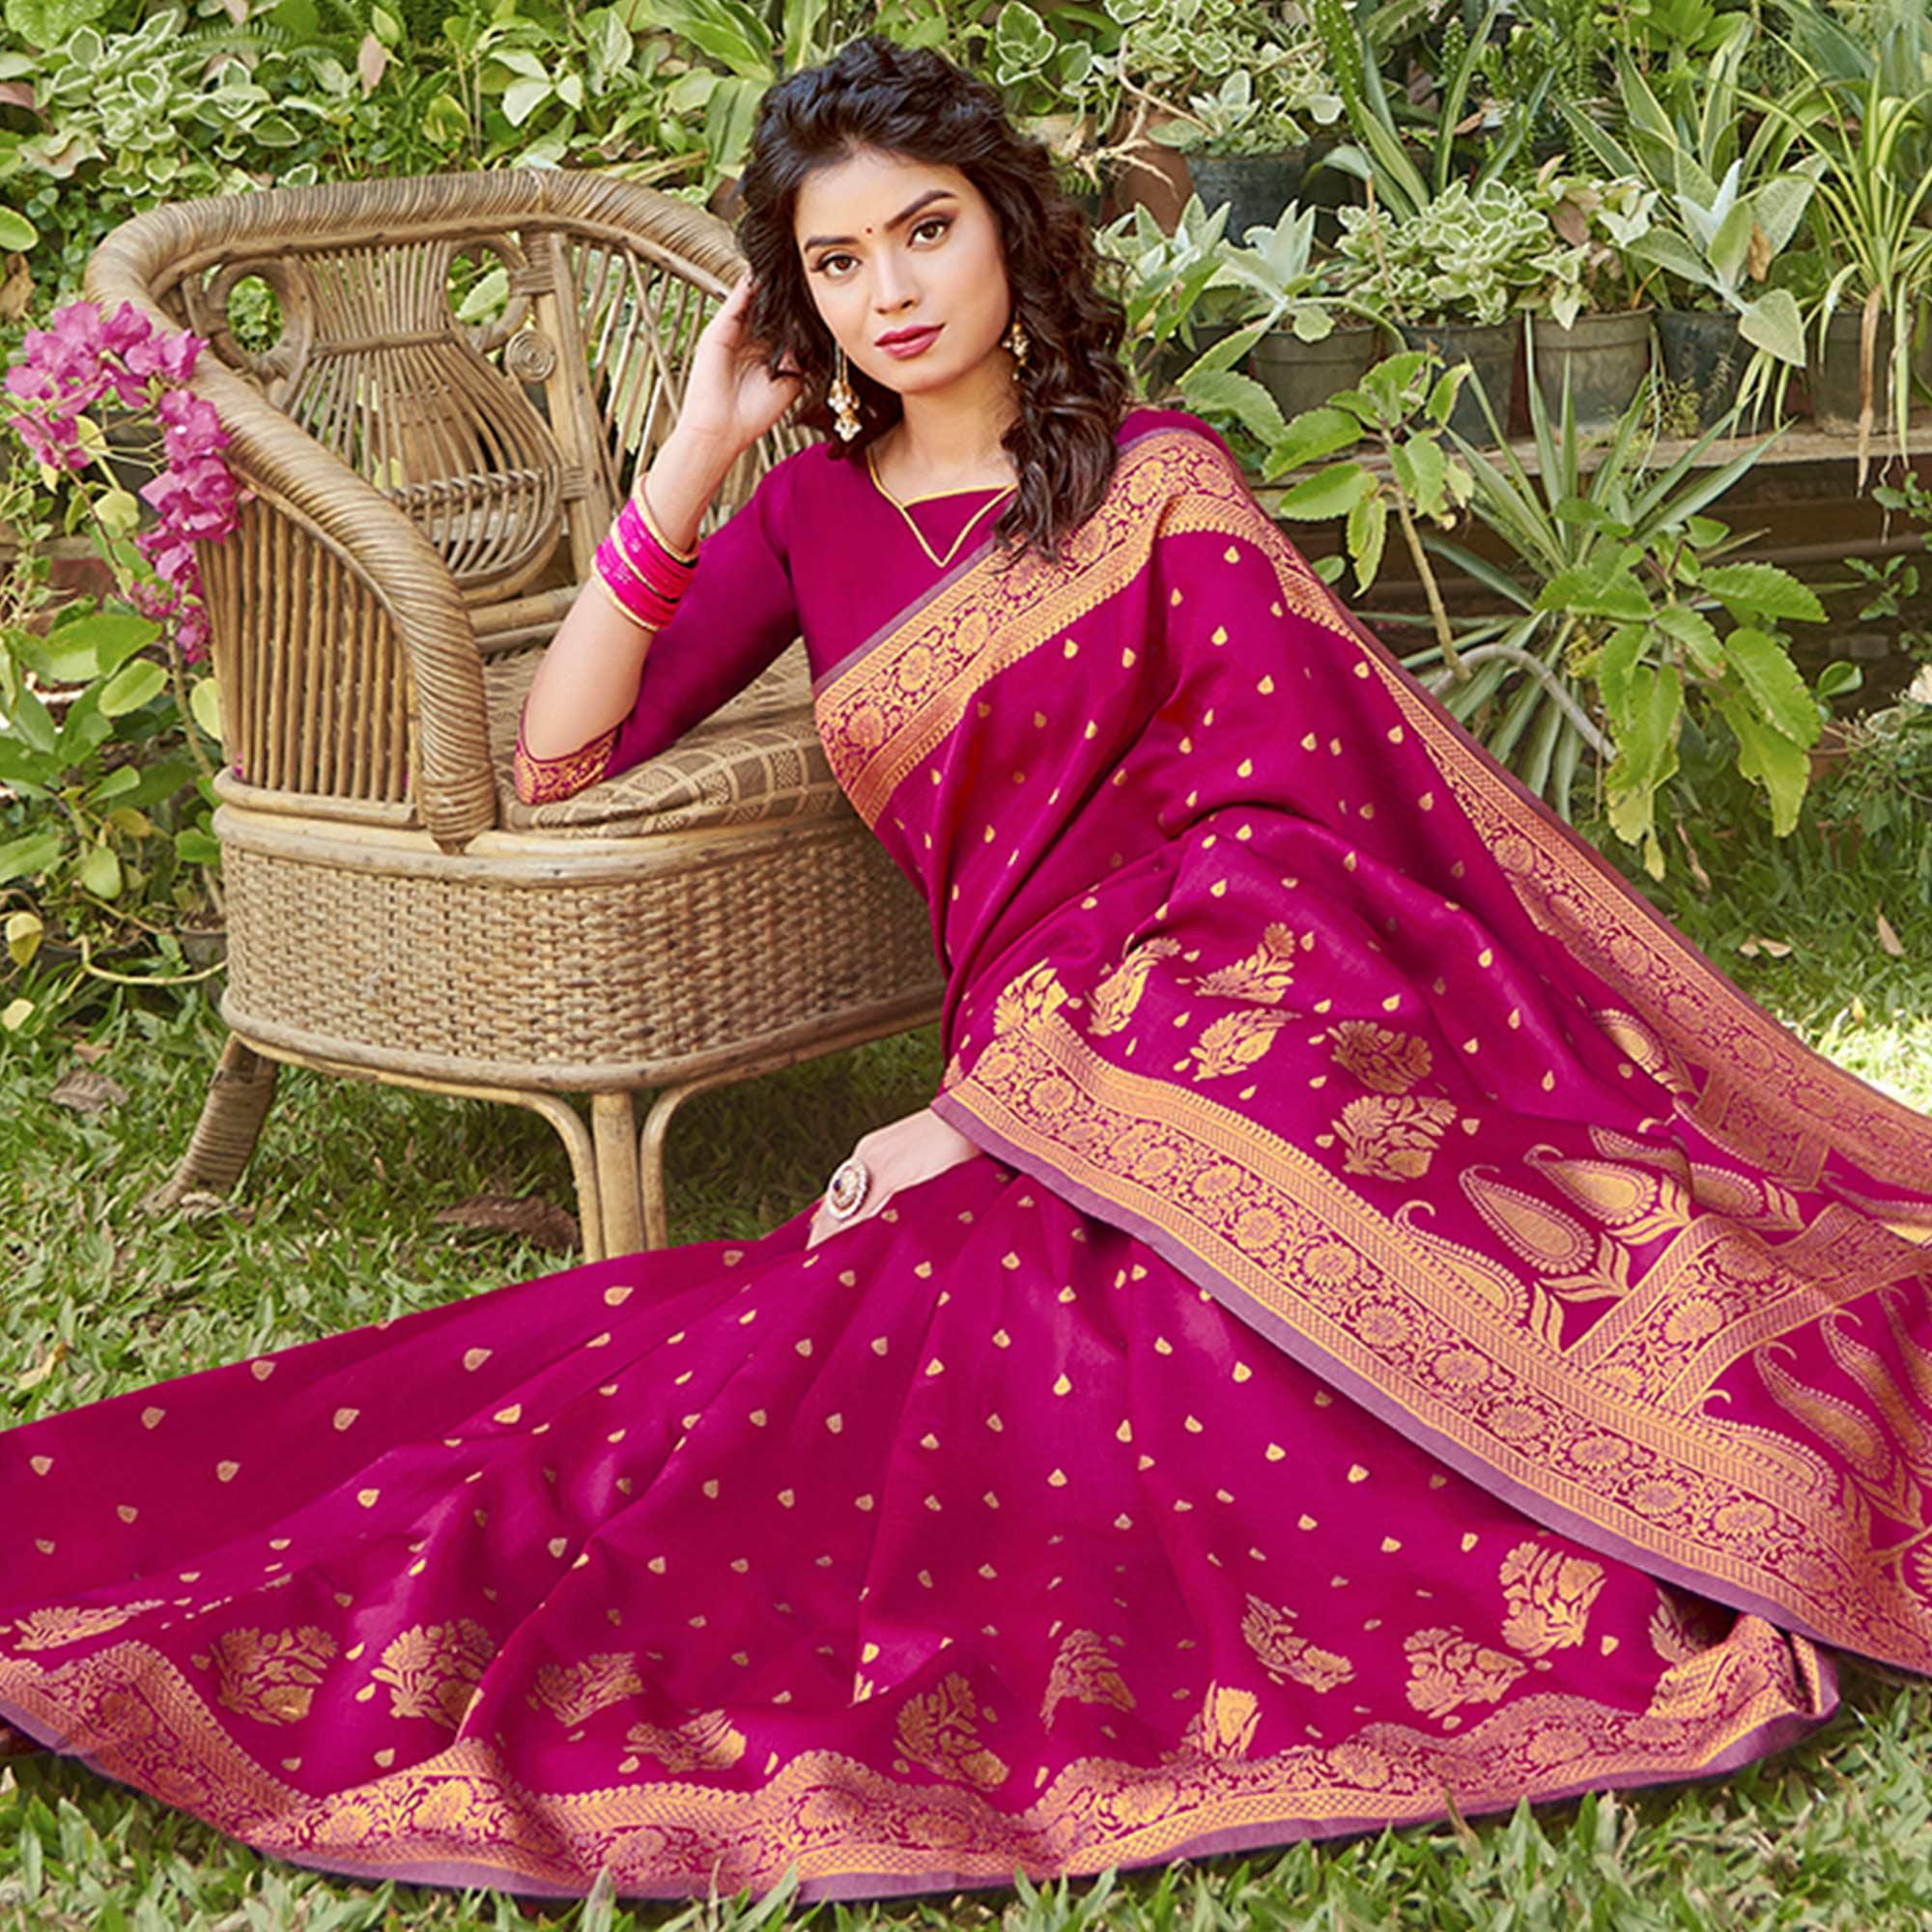 Mesmerising Magenta Pink Colored Festive Wear Floral Woven Silk Blend Saree With Tassels - Peachmode